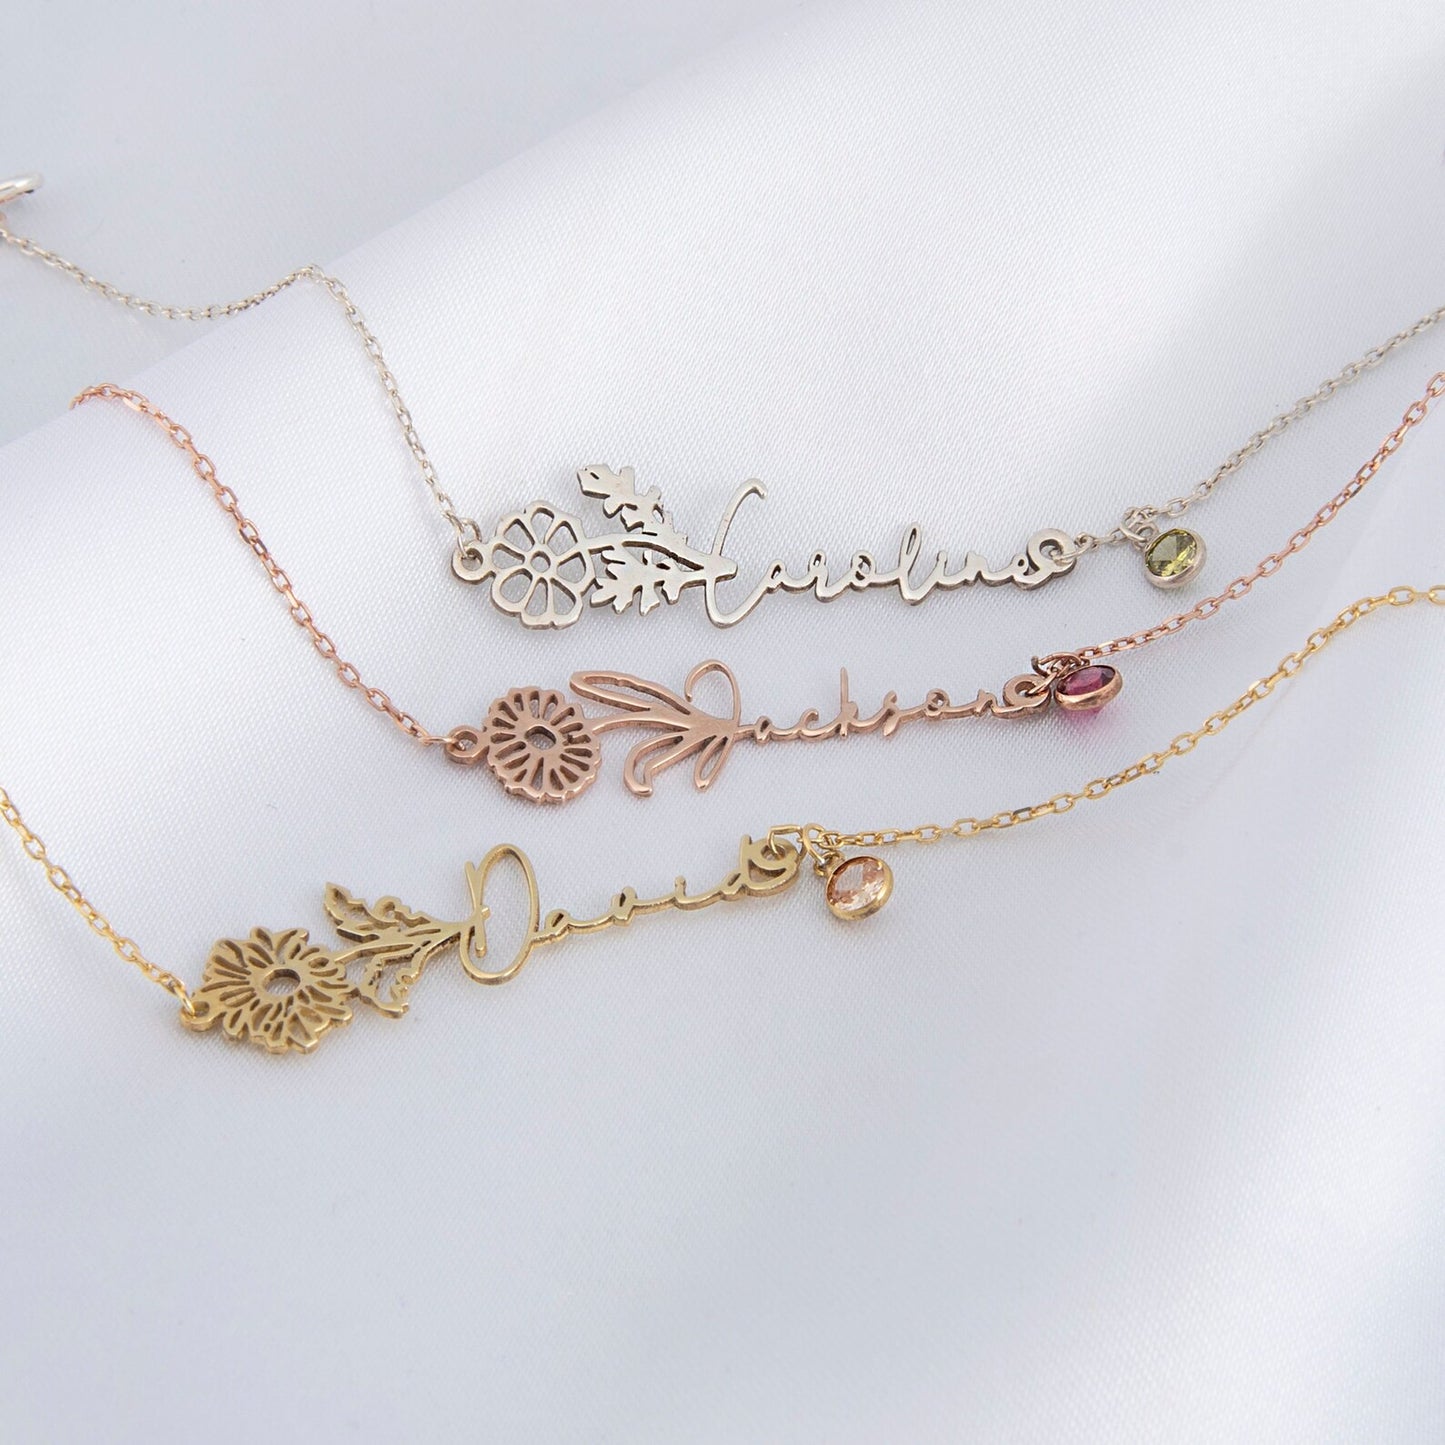 Choose from yellow gold, white gold, or rose gold to perfectly match her style and personality. Our bracelets are designed to dazzle and delight, making them the ideal luxurious gift for Valentine's Day, anniversaries, birthdays, or Mother's Day.